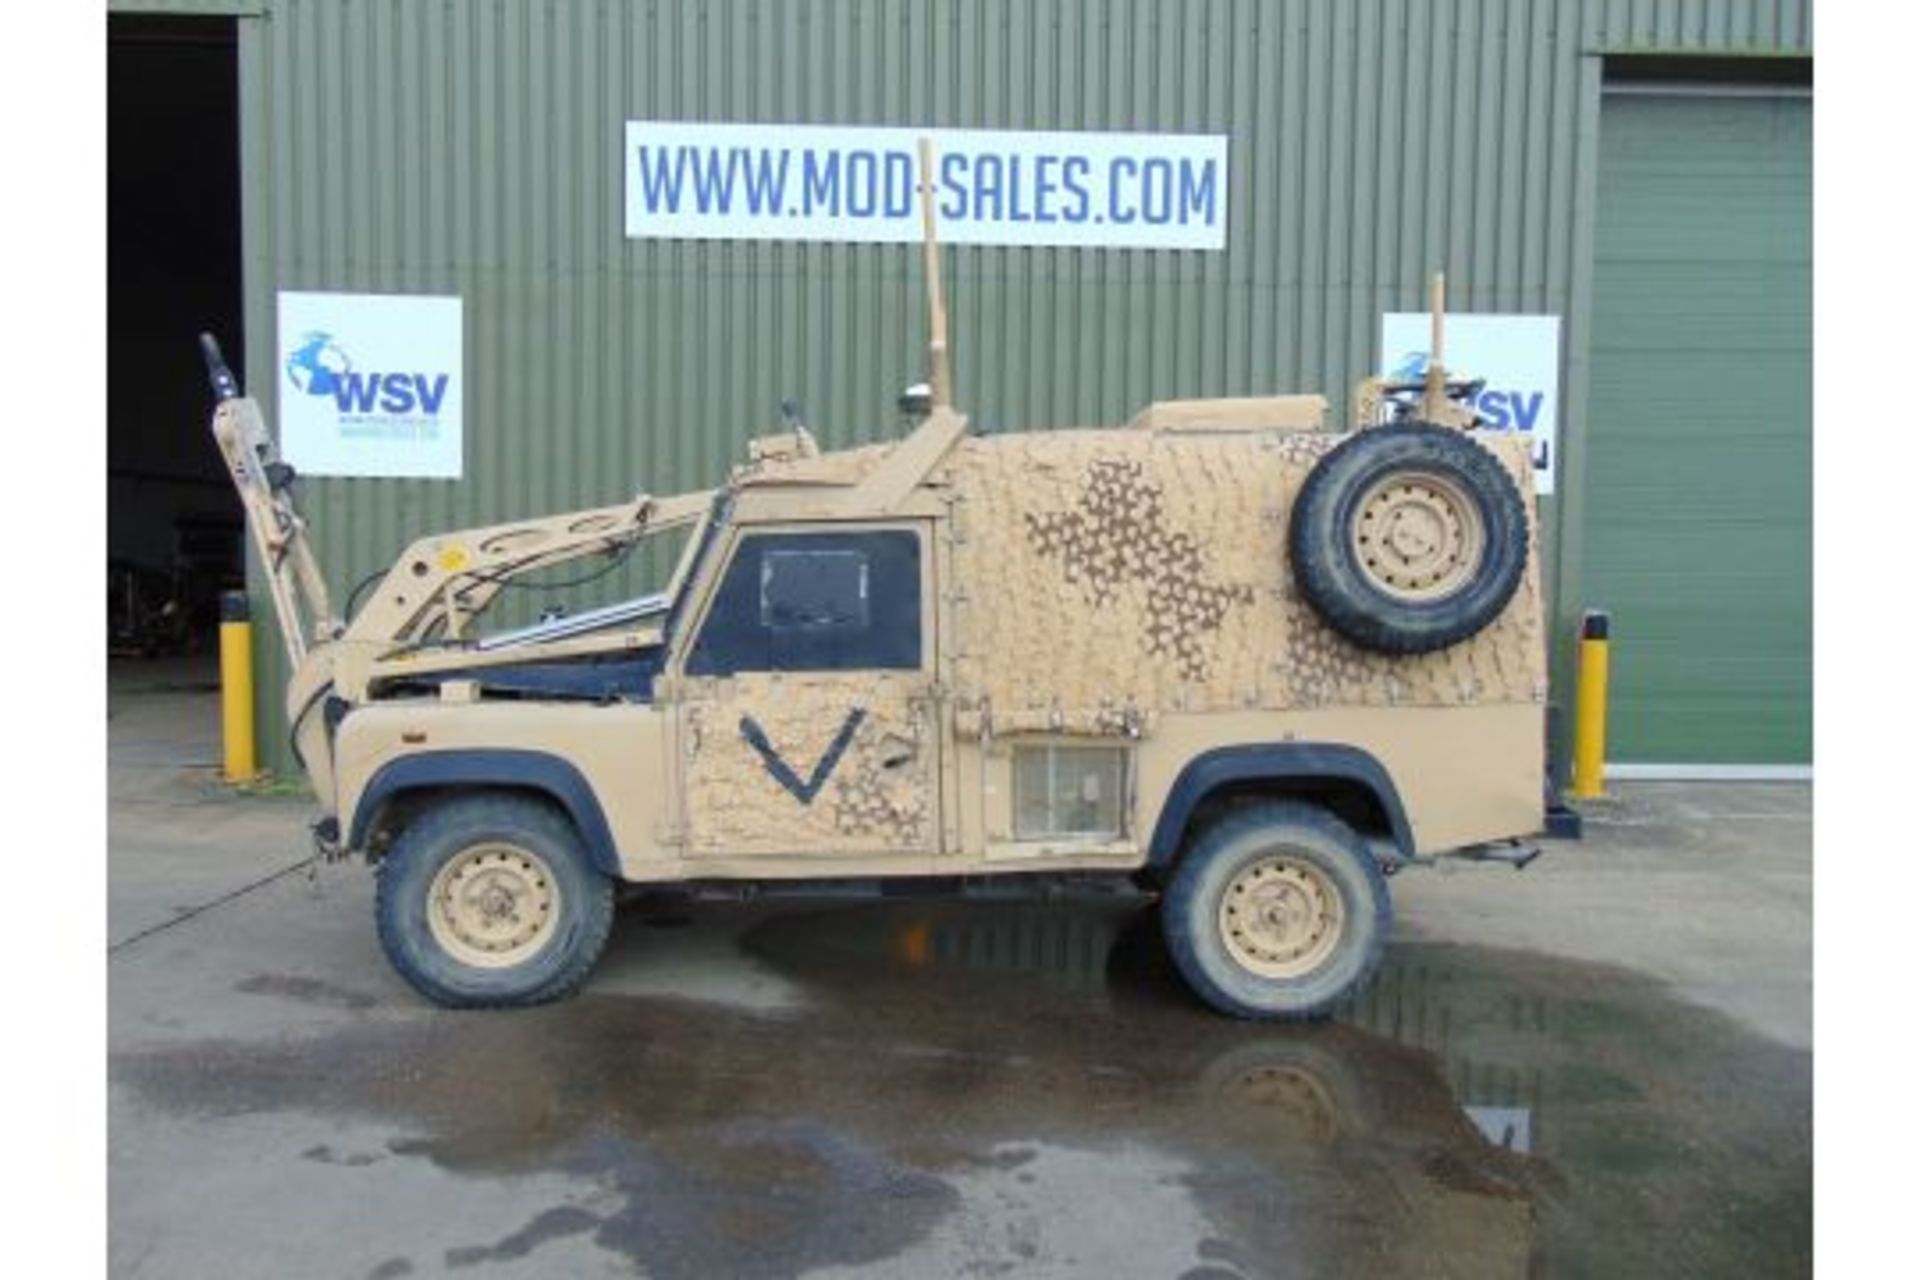 Very Rare Remote Controlled Land Rover 110 300TDi Panama Snatch-2A (HT) W/VPK 24V - ONLY 286 HOURS - Image 7 of 36